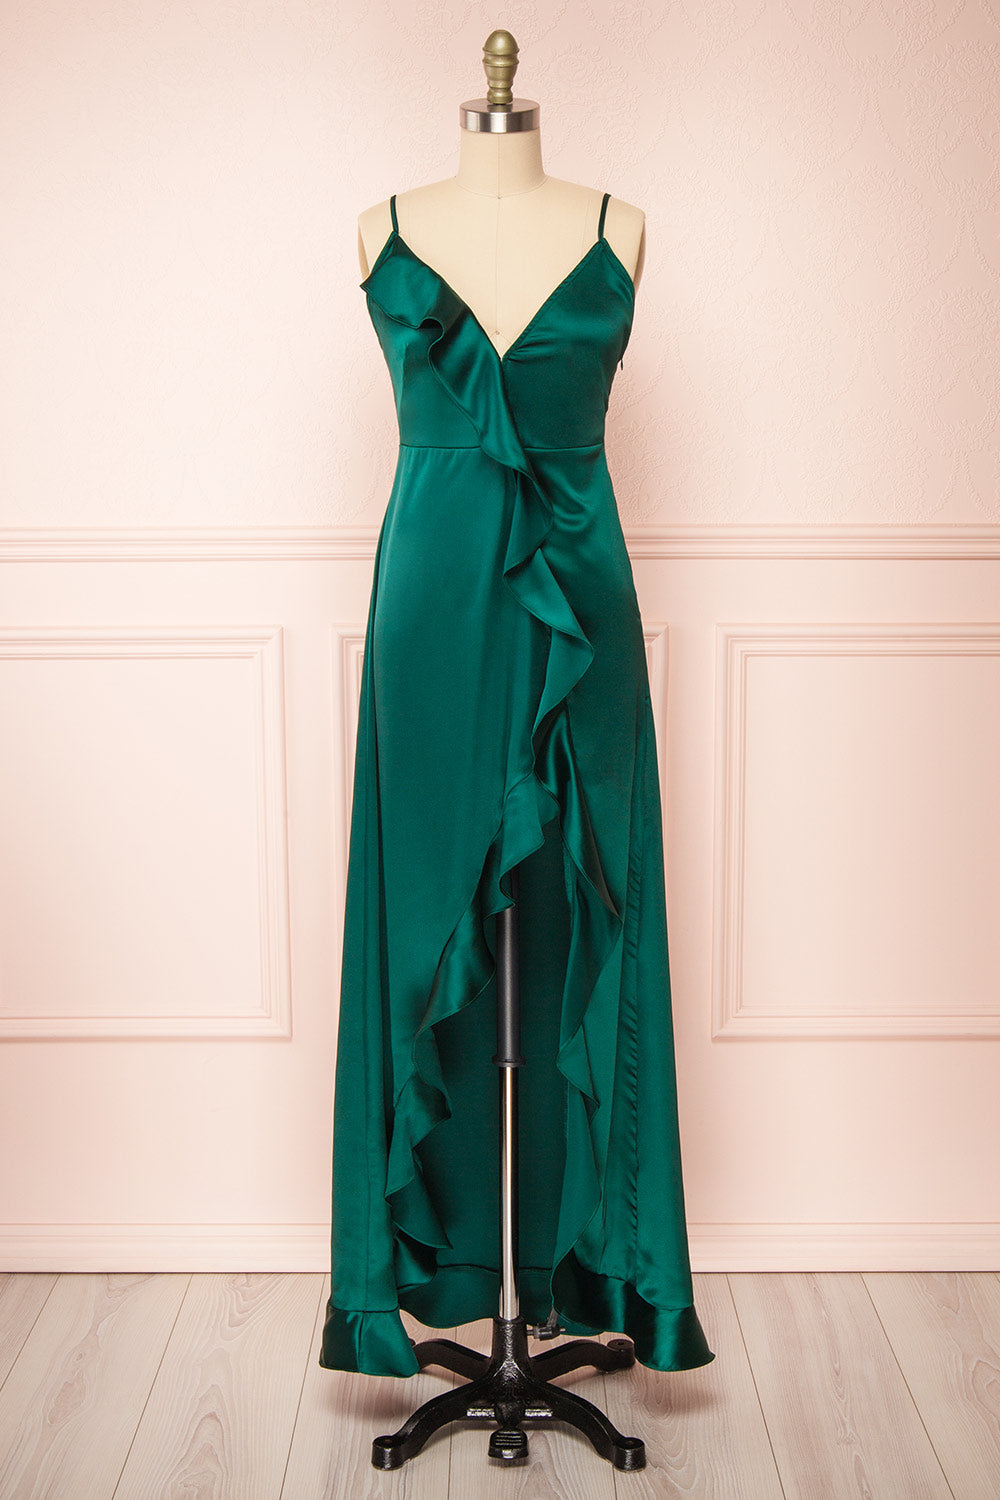 Patricia Green Dress w/ Ruffles | Boutique 1861 front view